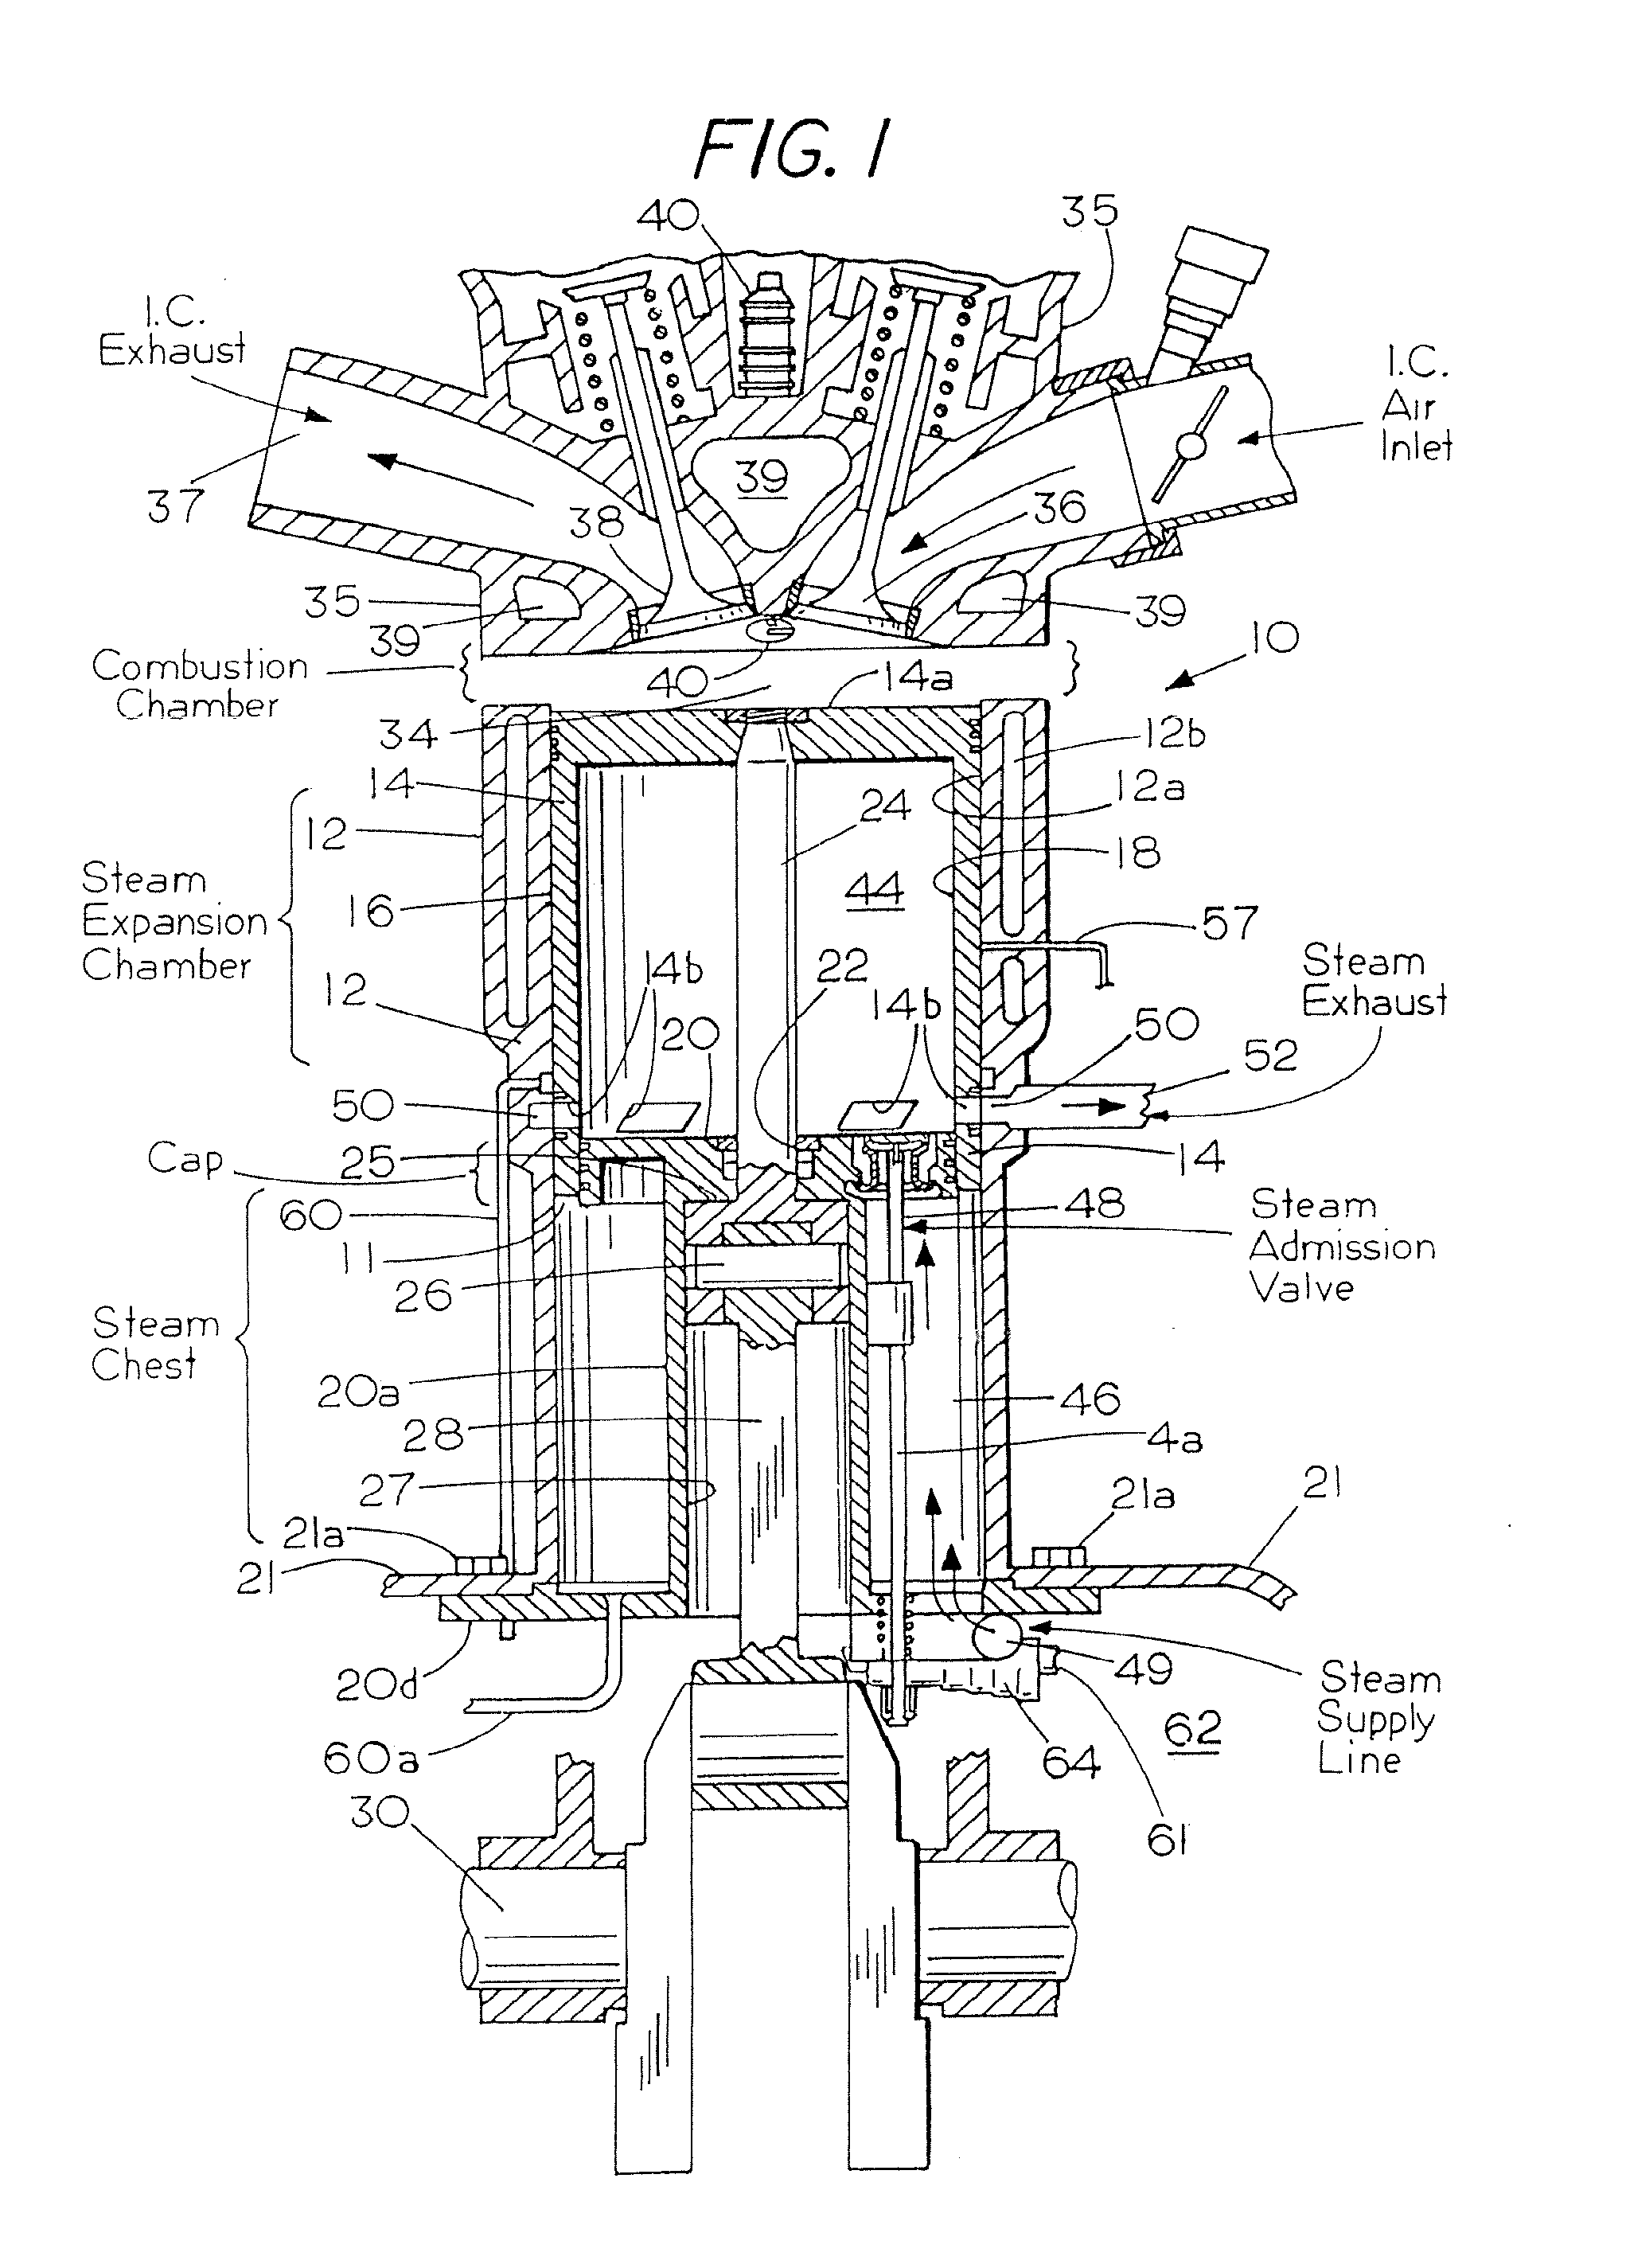 Internal combustion engine with auxiliary steam power recovered from waste heat